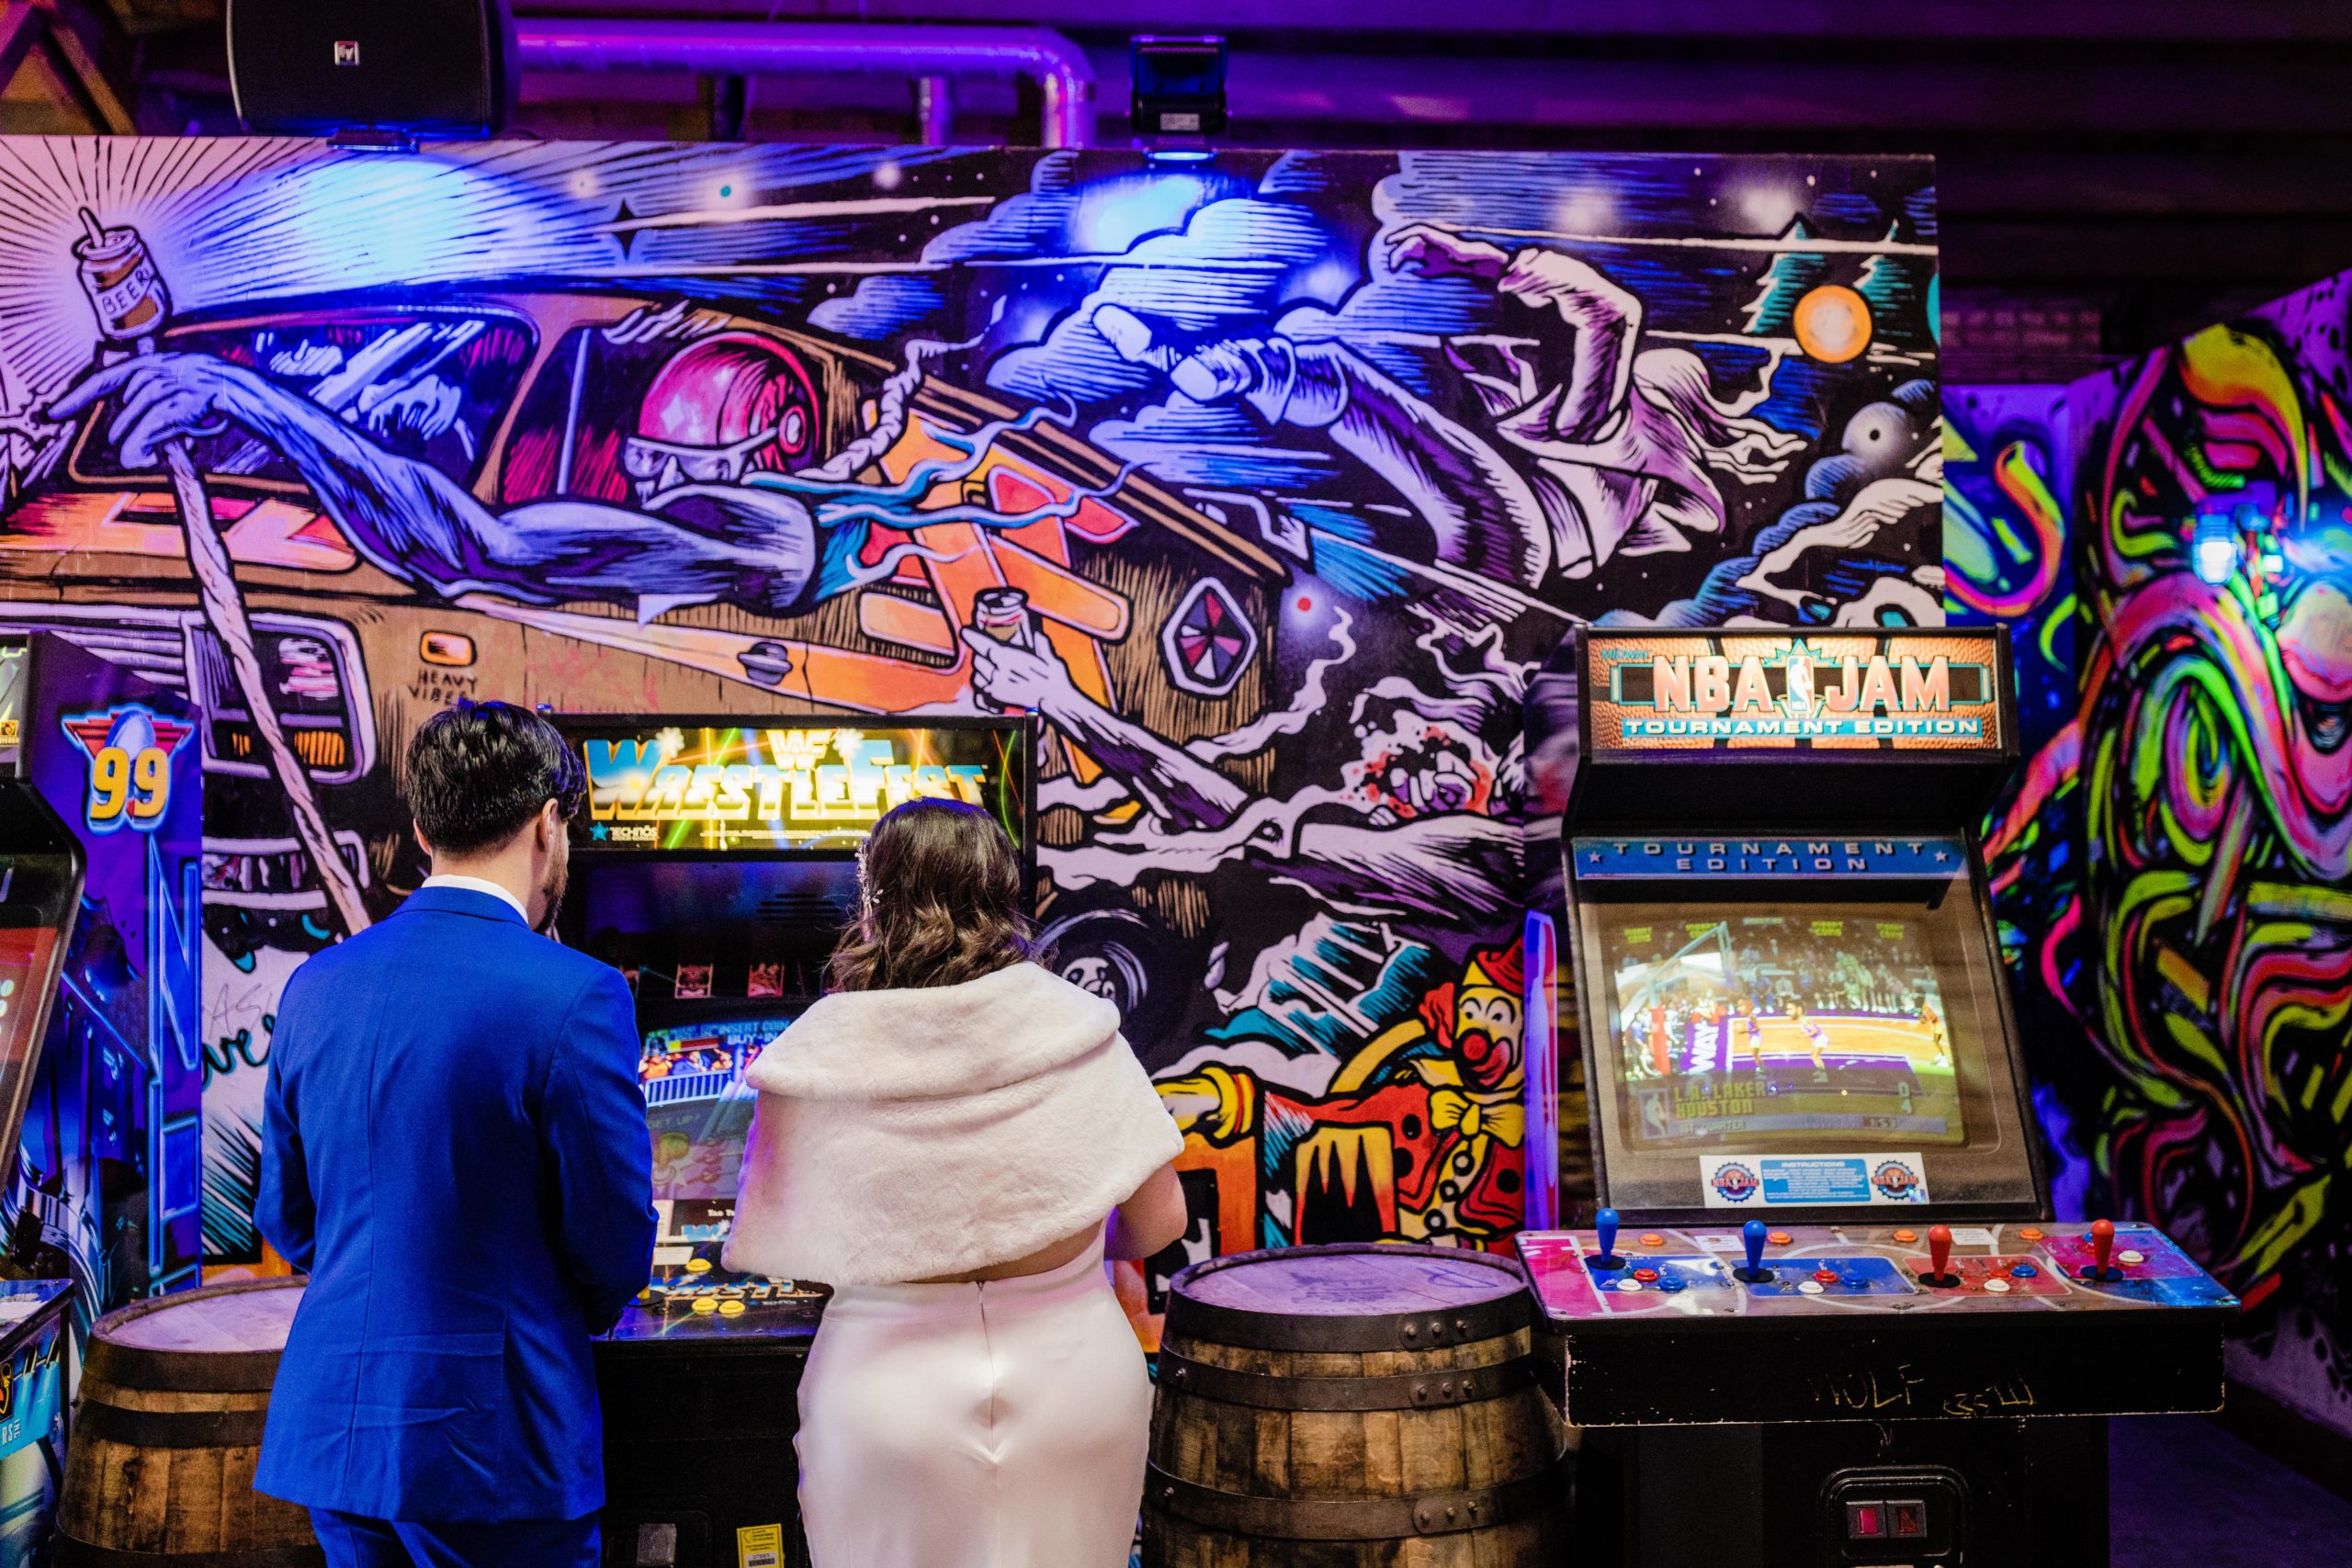 Bride and groom playing video games at Emporium Arcade Bar